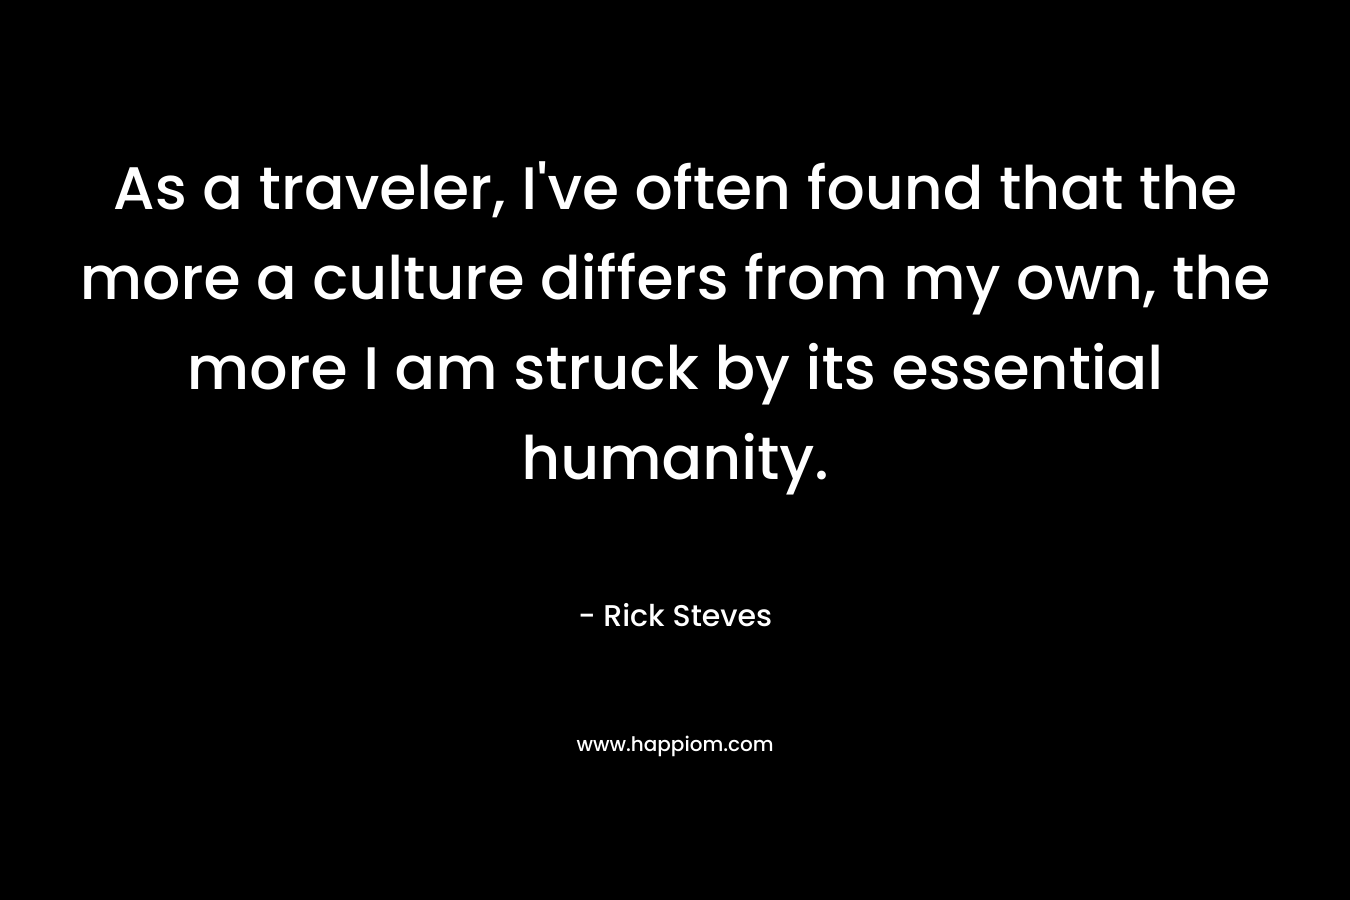 As a traveler, I’ve often found that the more a culture differs from my own, the more I am struck by its essential humanity. – Rick Steves